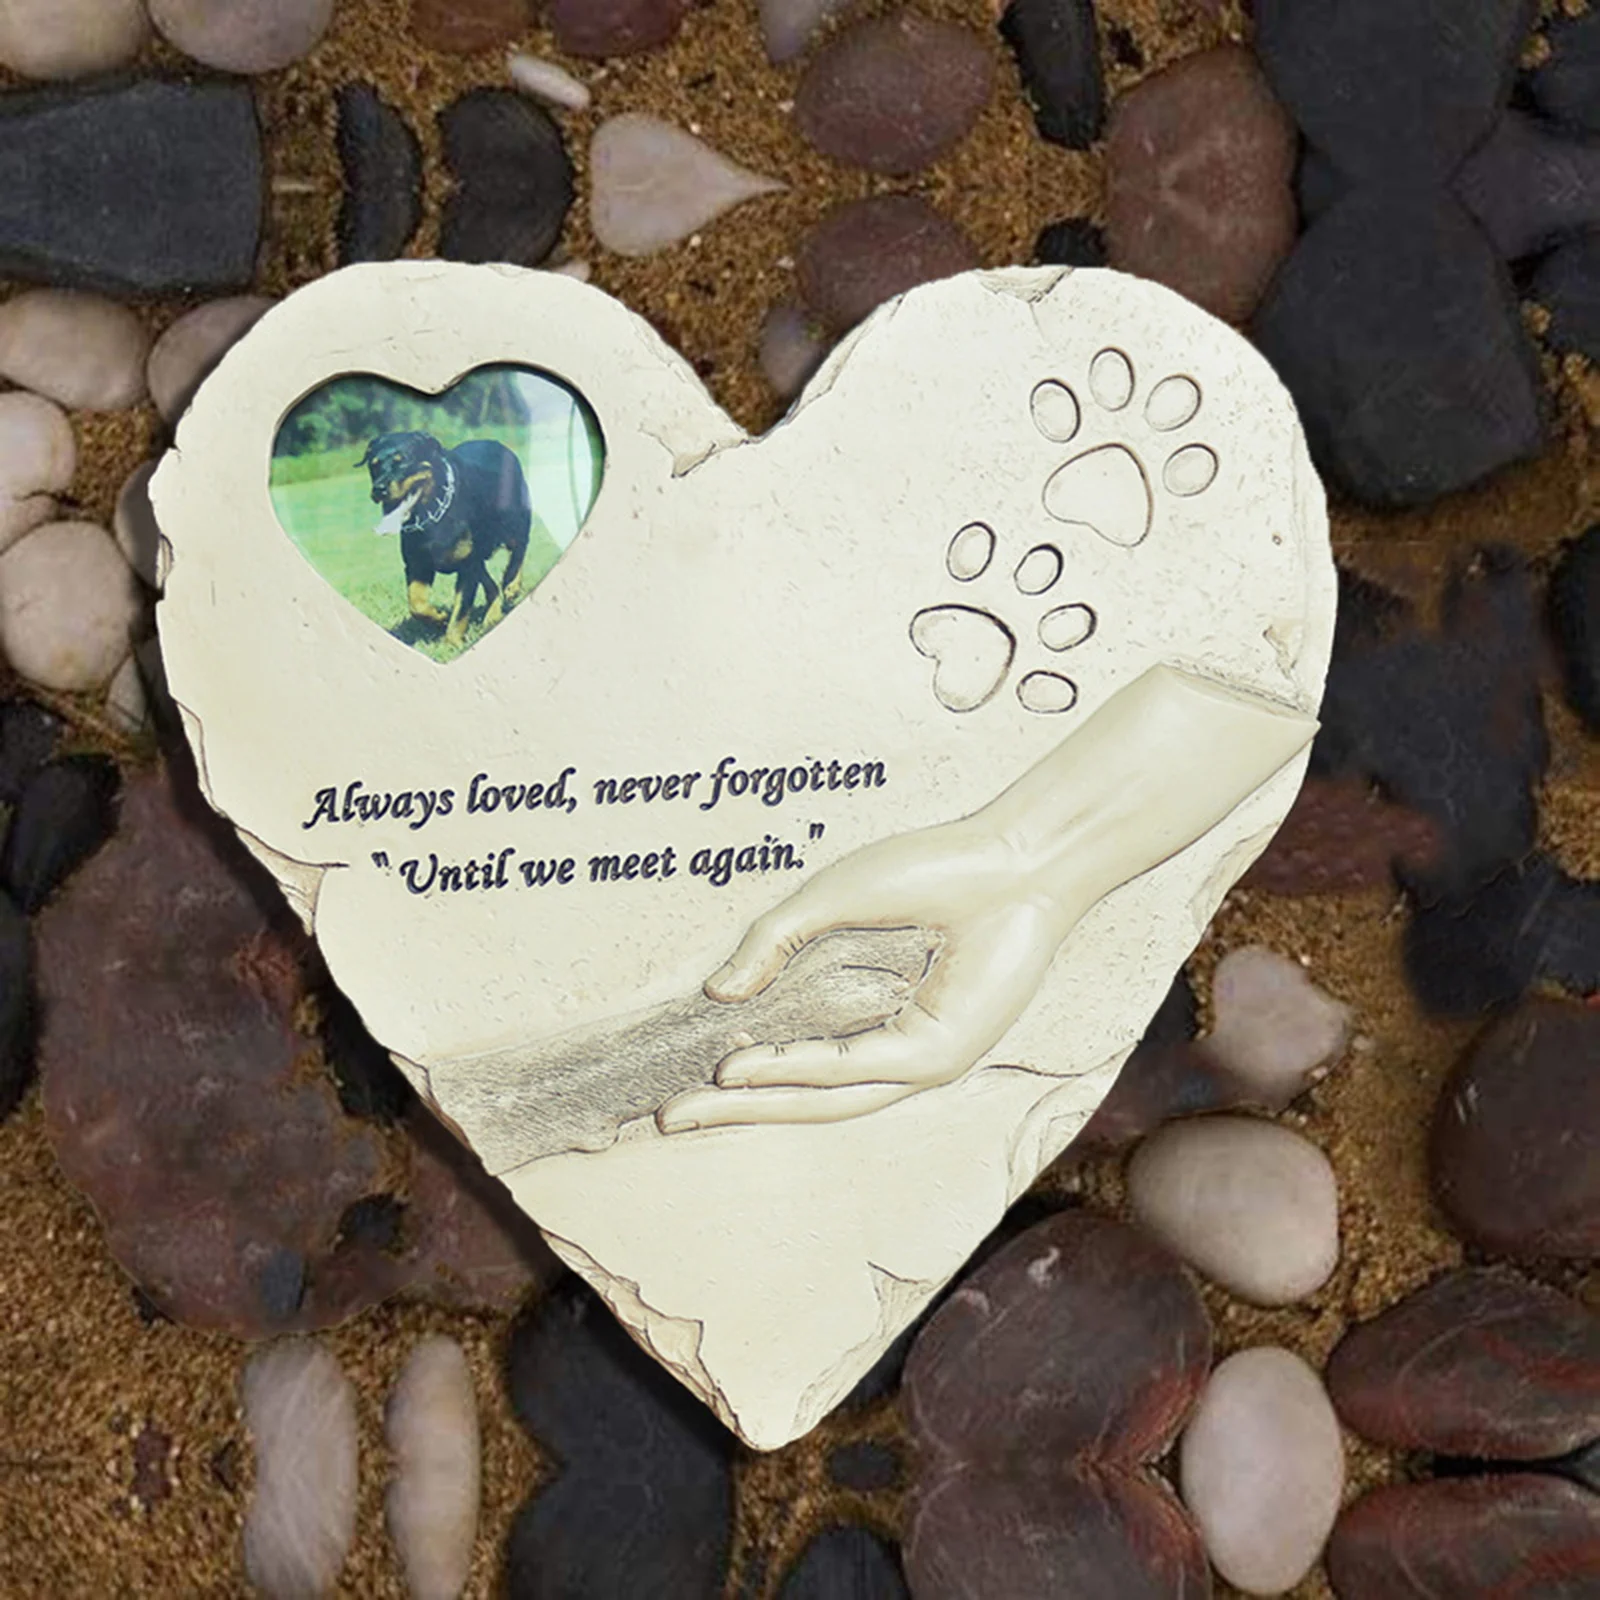 Engraved Pet Memorial Stone Heart-Shaped Paw Print Dog Headstone with Poem Photo Frame Outdoor Puppy Grave Marker